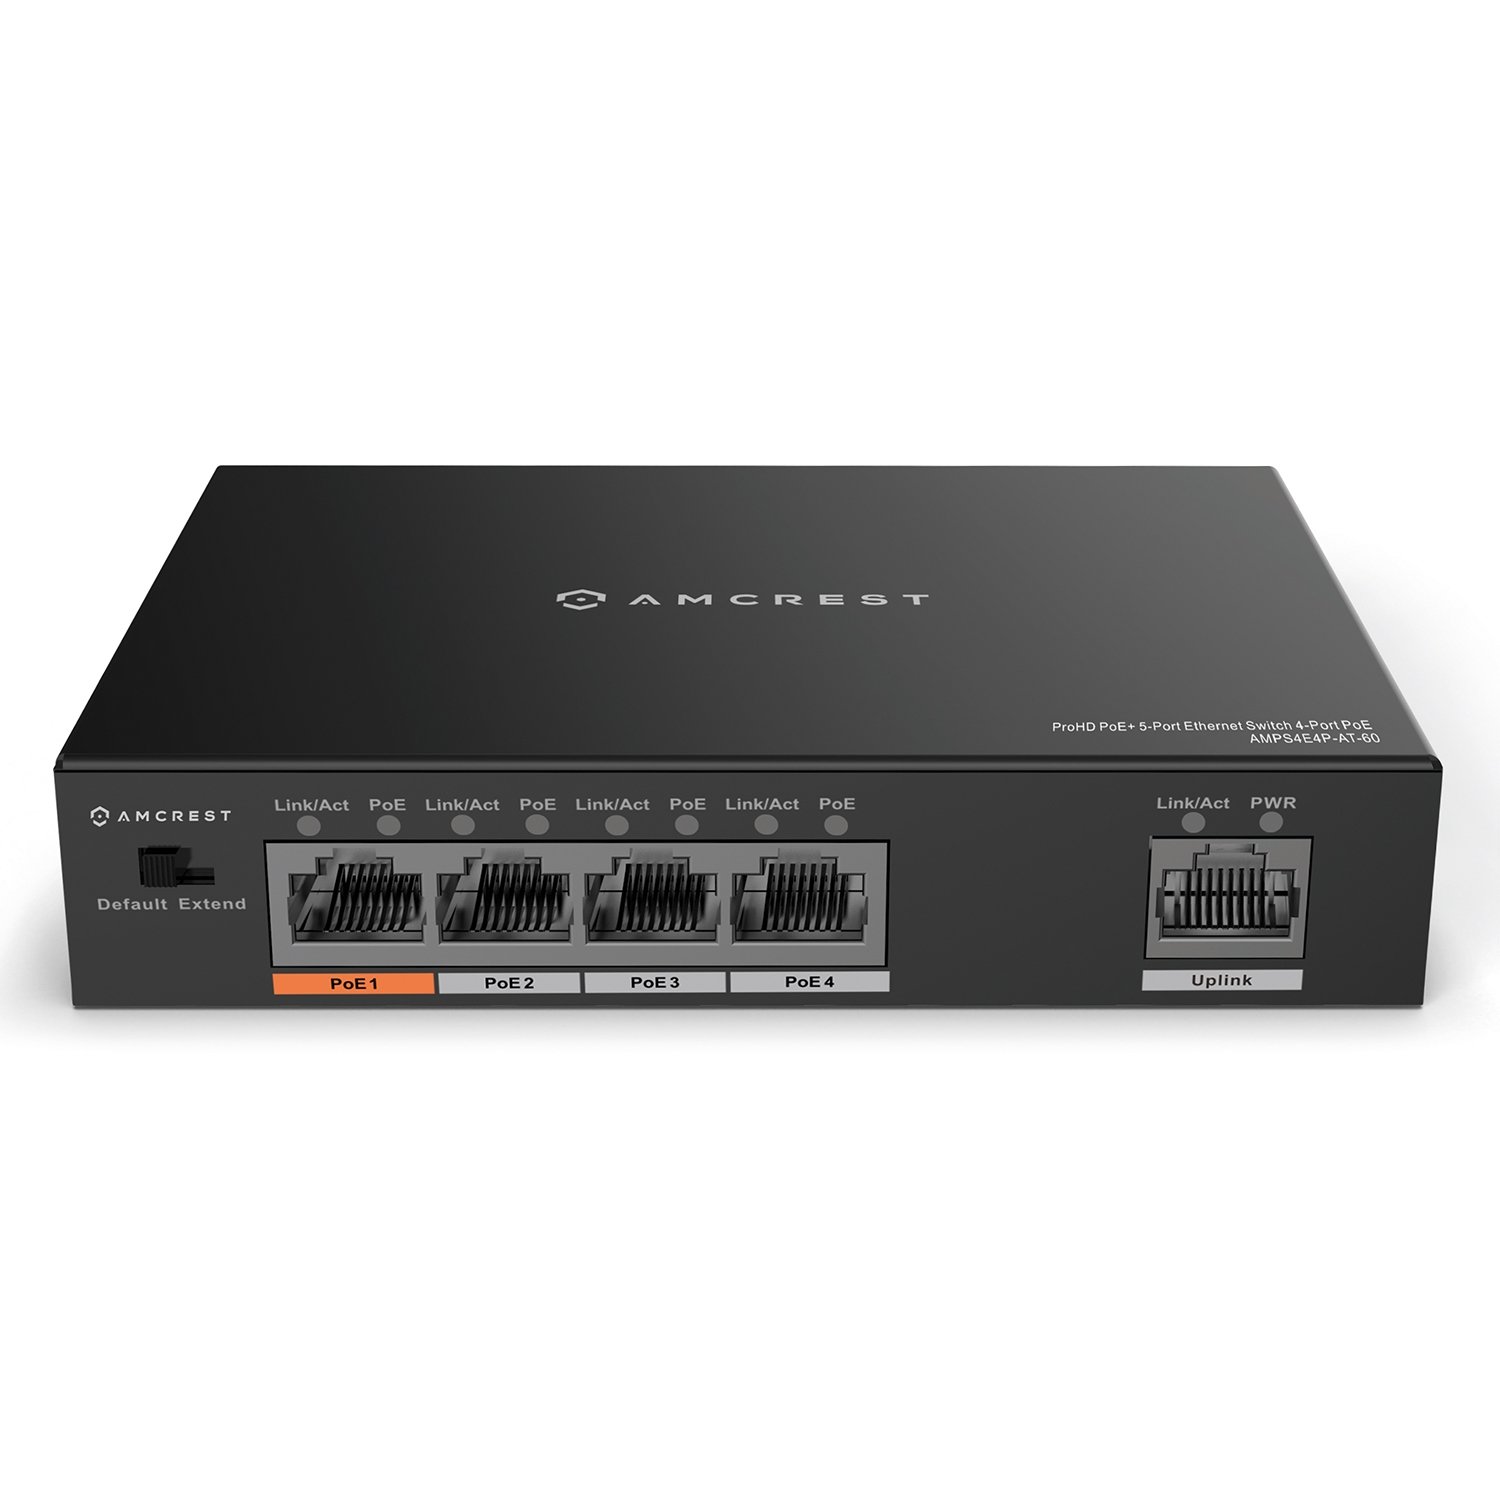 Amcrest 4-Port POE+ Power Over Ethernet POE Switch with Metal Housing,  4-Ports POE+ 802.3af/at 60W (AMPS4E4P-AT-60)